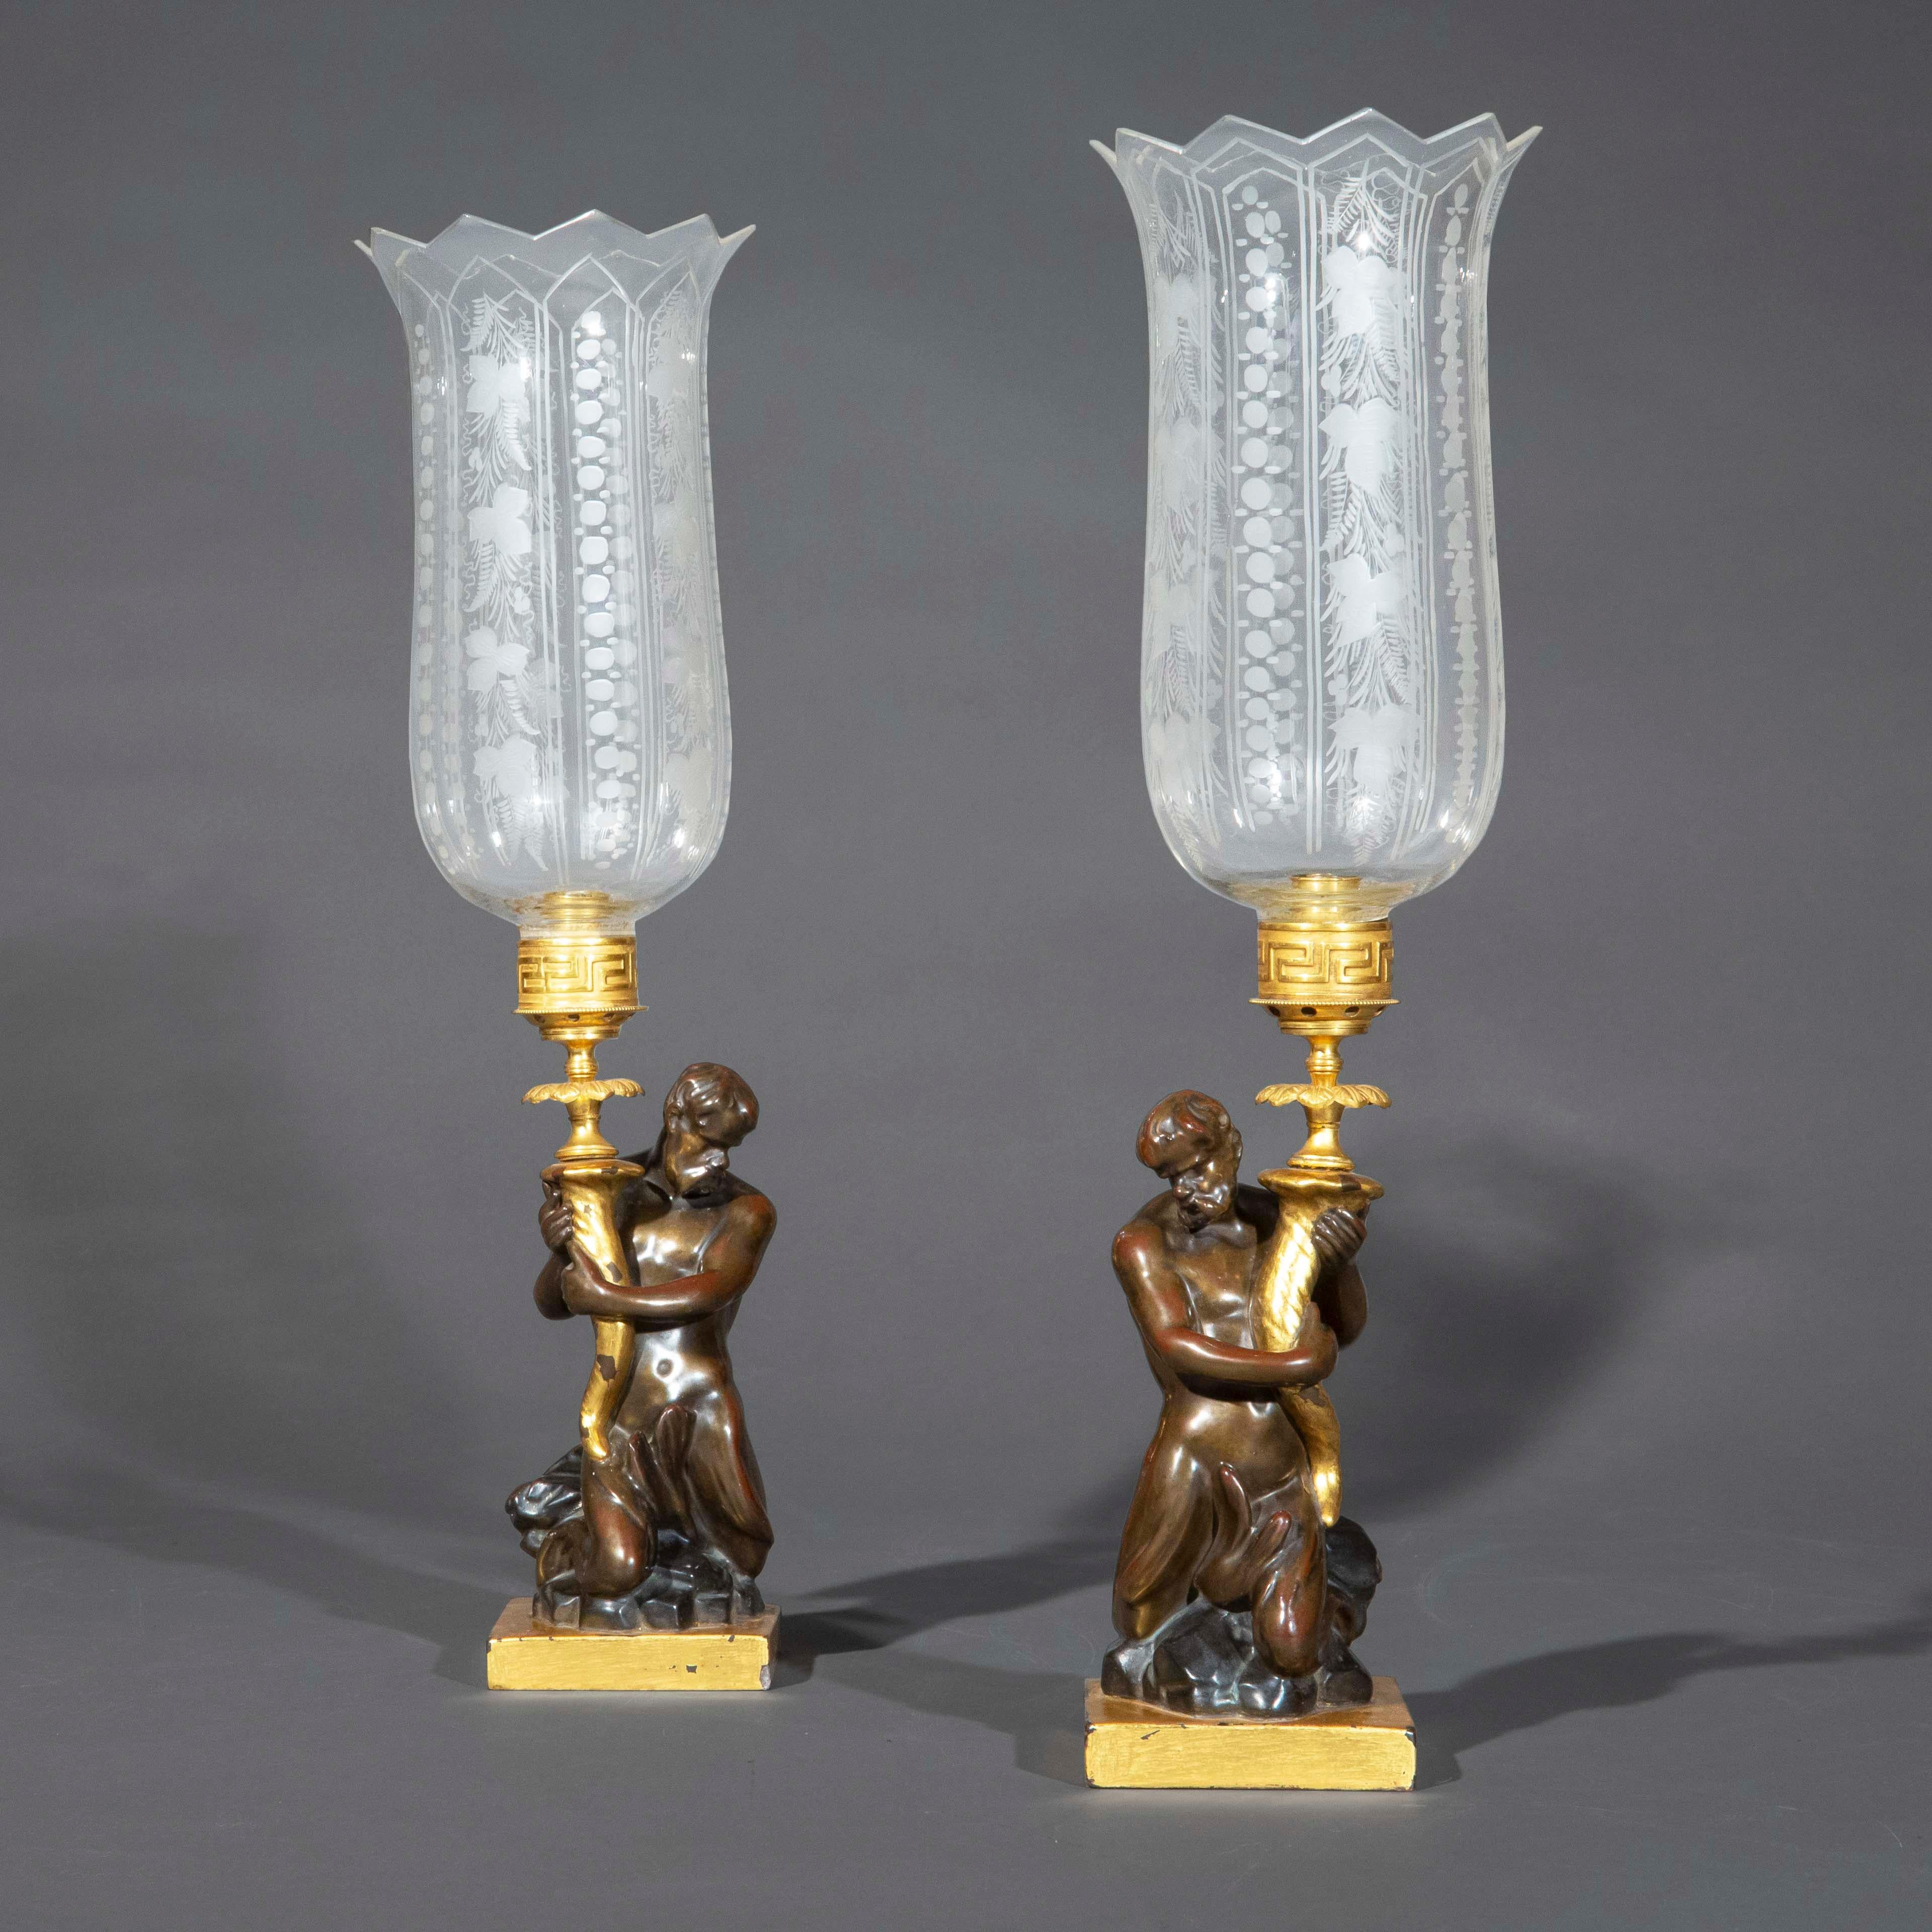 Pair of Early 19th Century Triton Candlesticks Storm Lanterns by Wood & Caldwell For Sale 1